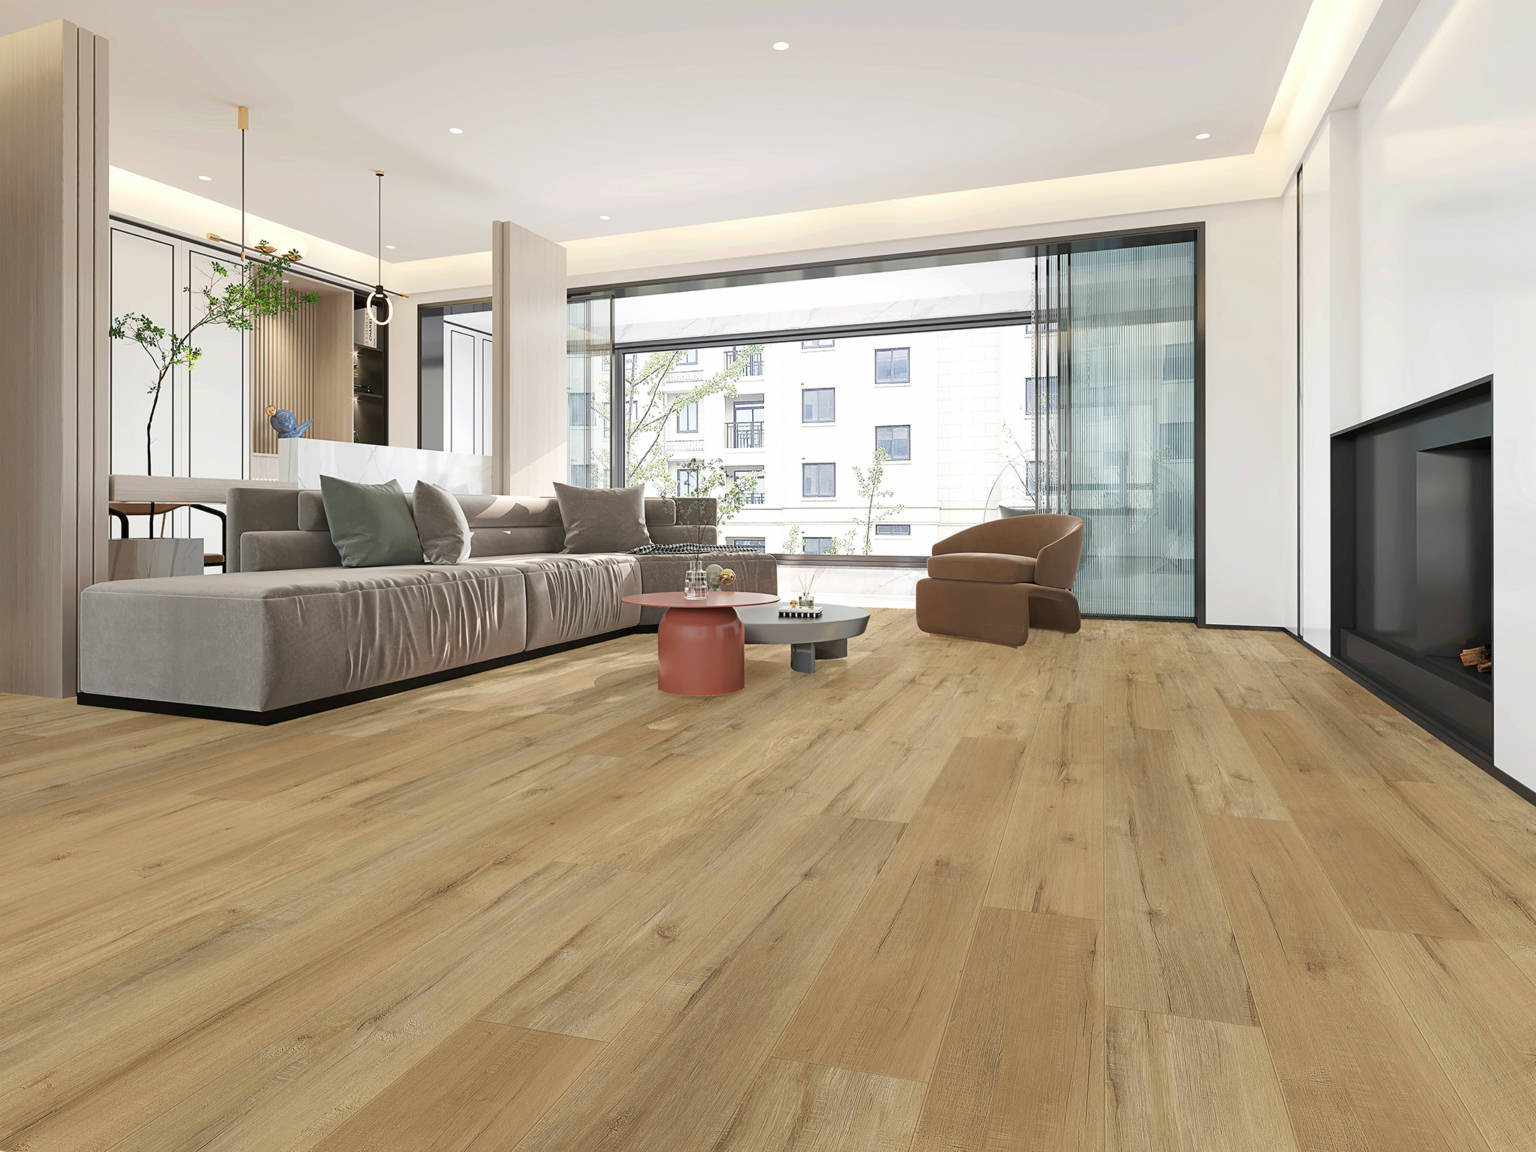 Timber Ridge Gold 20 3 | Qualis Ceramica | Luxury Tile and Vinyl at affordable prices